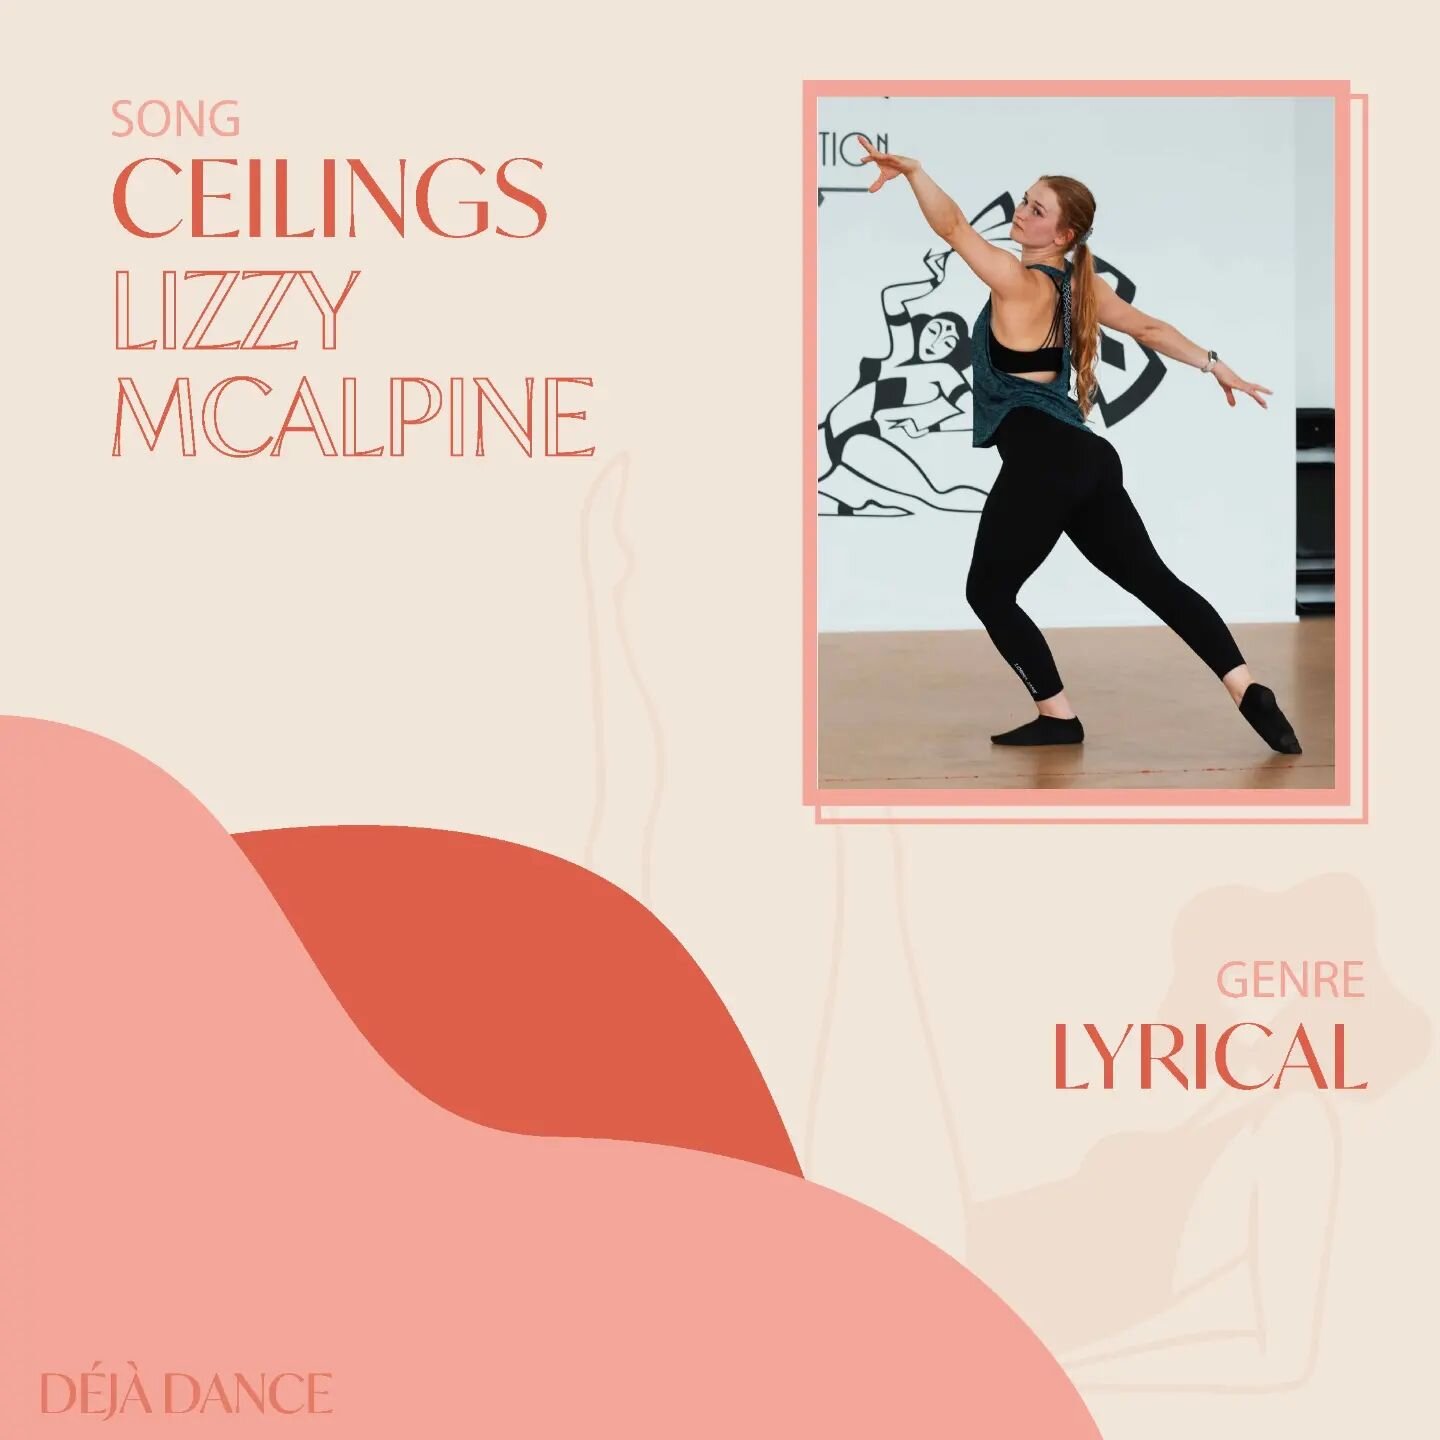 We're getting flowy this week with a lyrical dance to &quot;Ceilings&quot; by Lizzy McAlpine! Come along and have your main character moment as we slow it down and bring out the emotion!

Wednesdays 6-7pm 
Corps de Burlesque studio 
$15 per class 
Ch